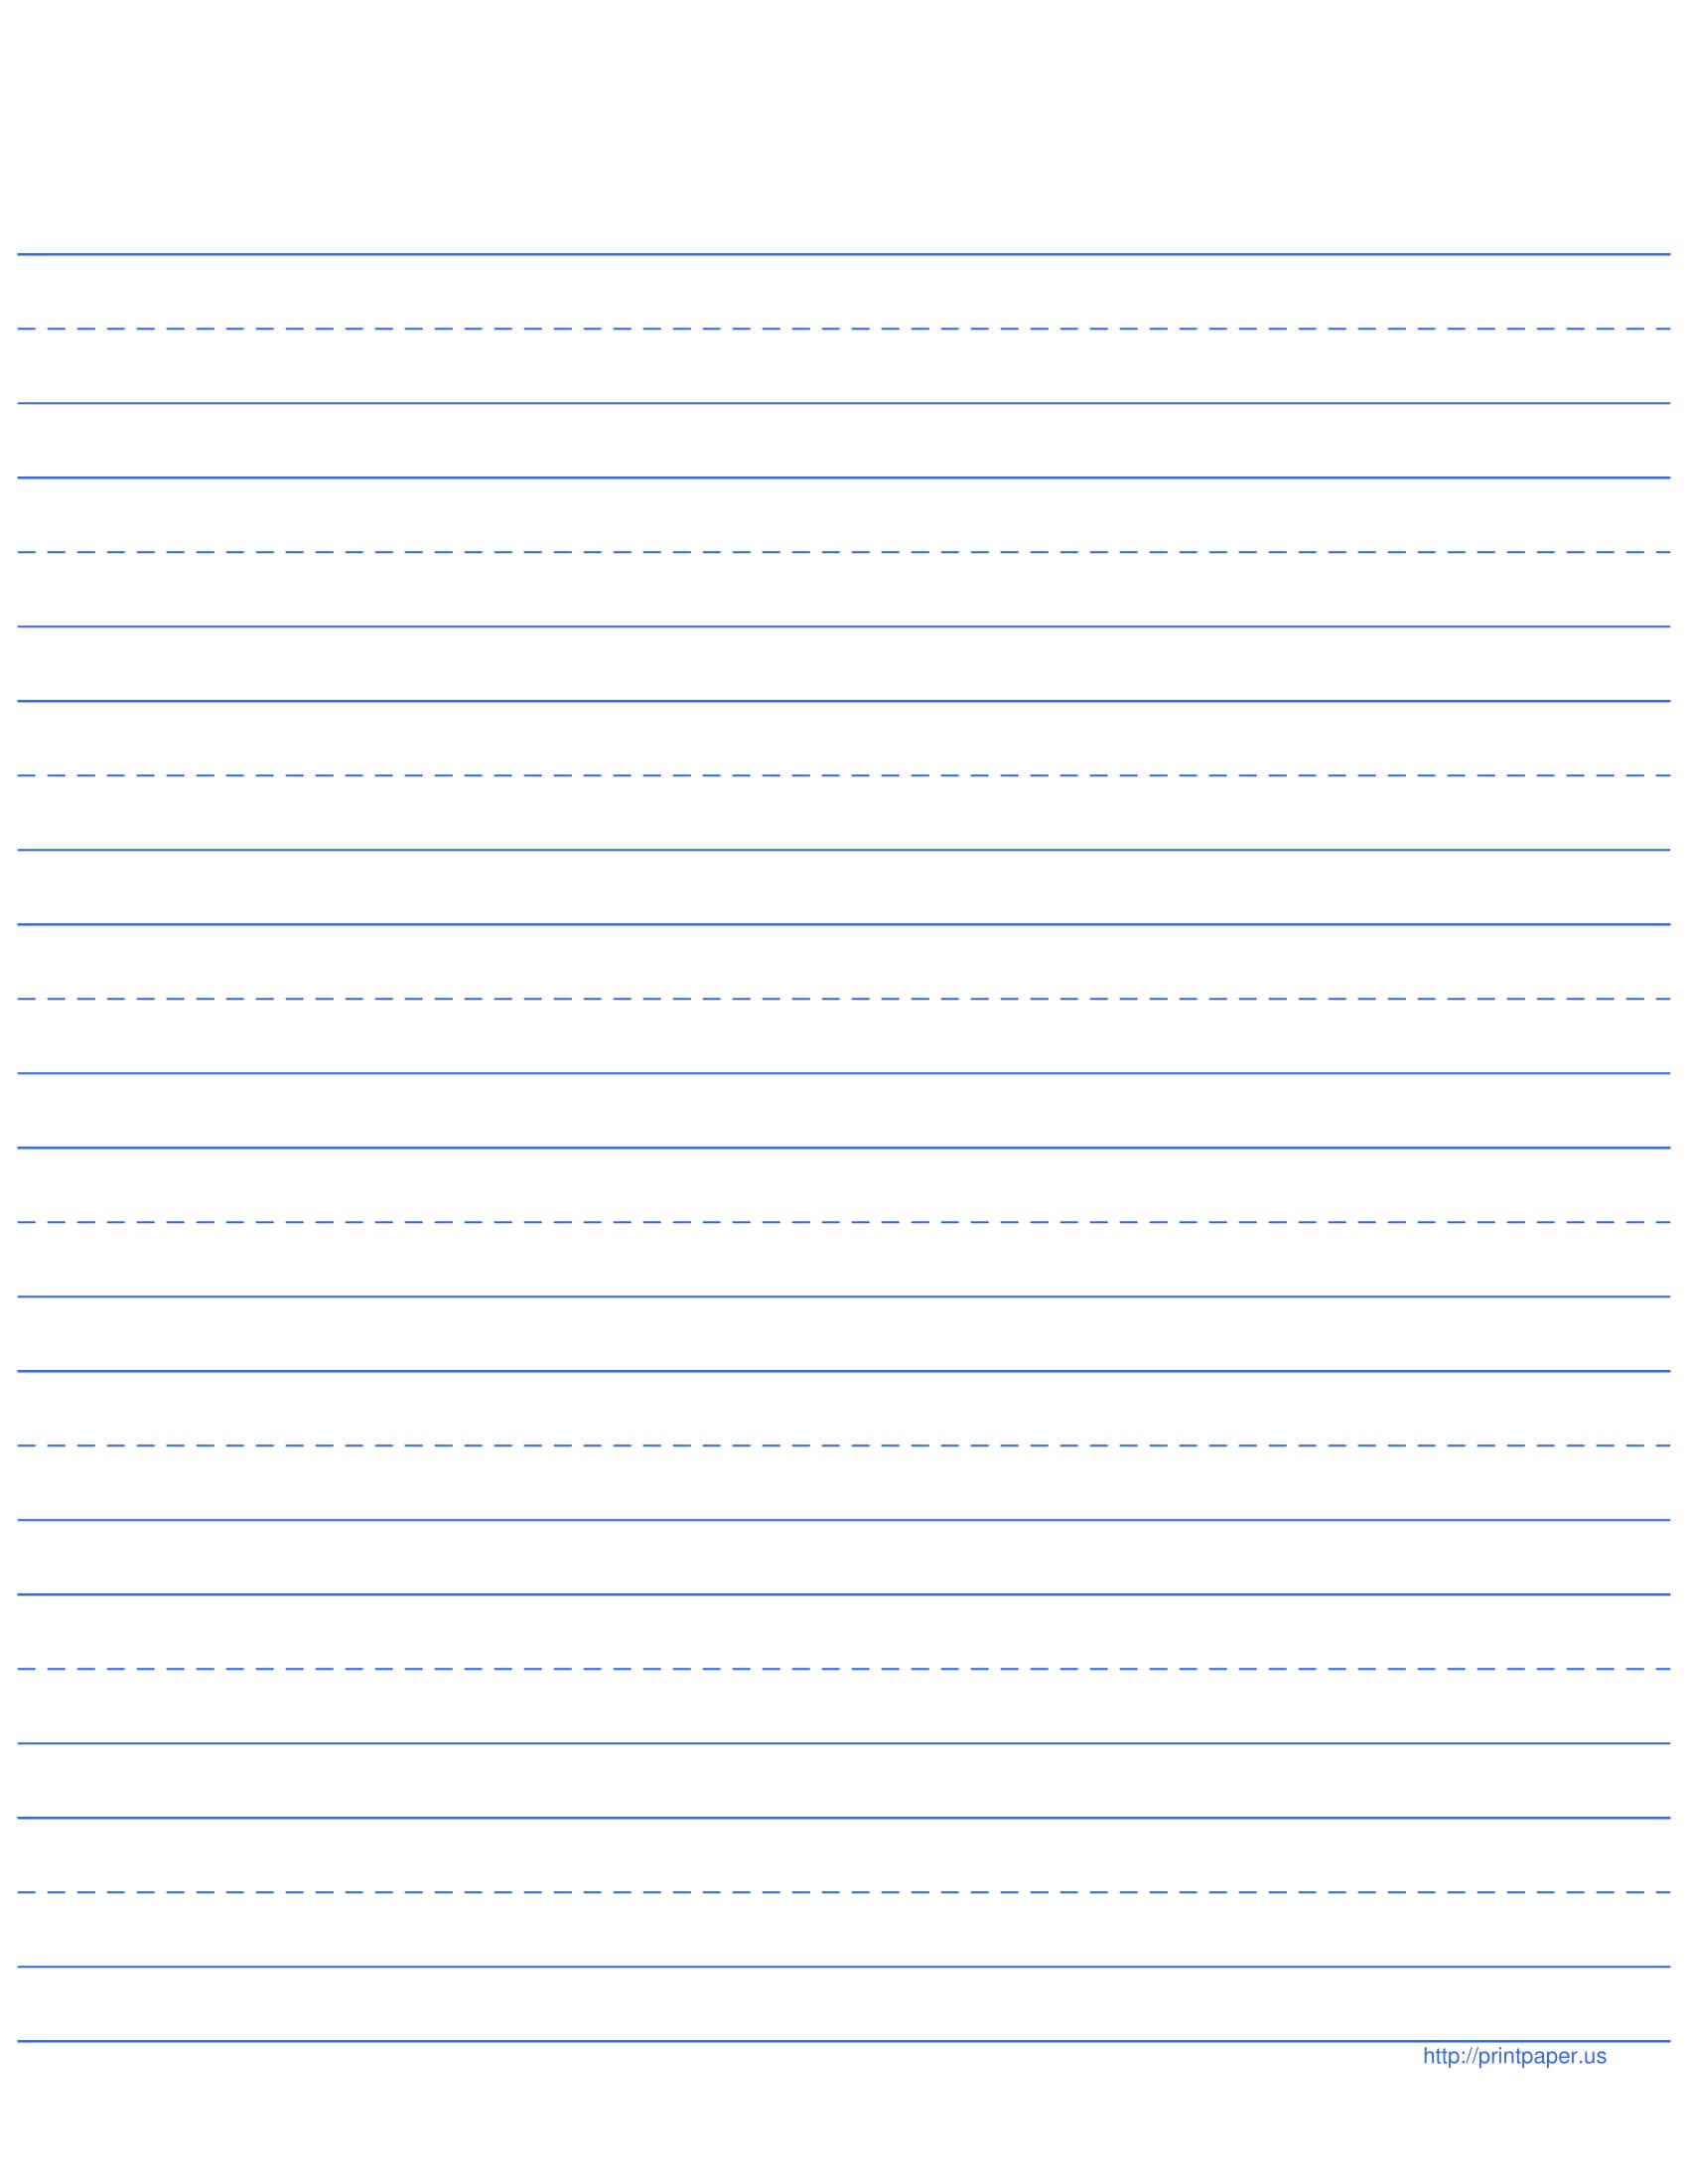 11+ Lined Paper Templates – Pdf | Free & Premium Templates Pertaining To Ruled Paper Template Word